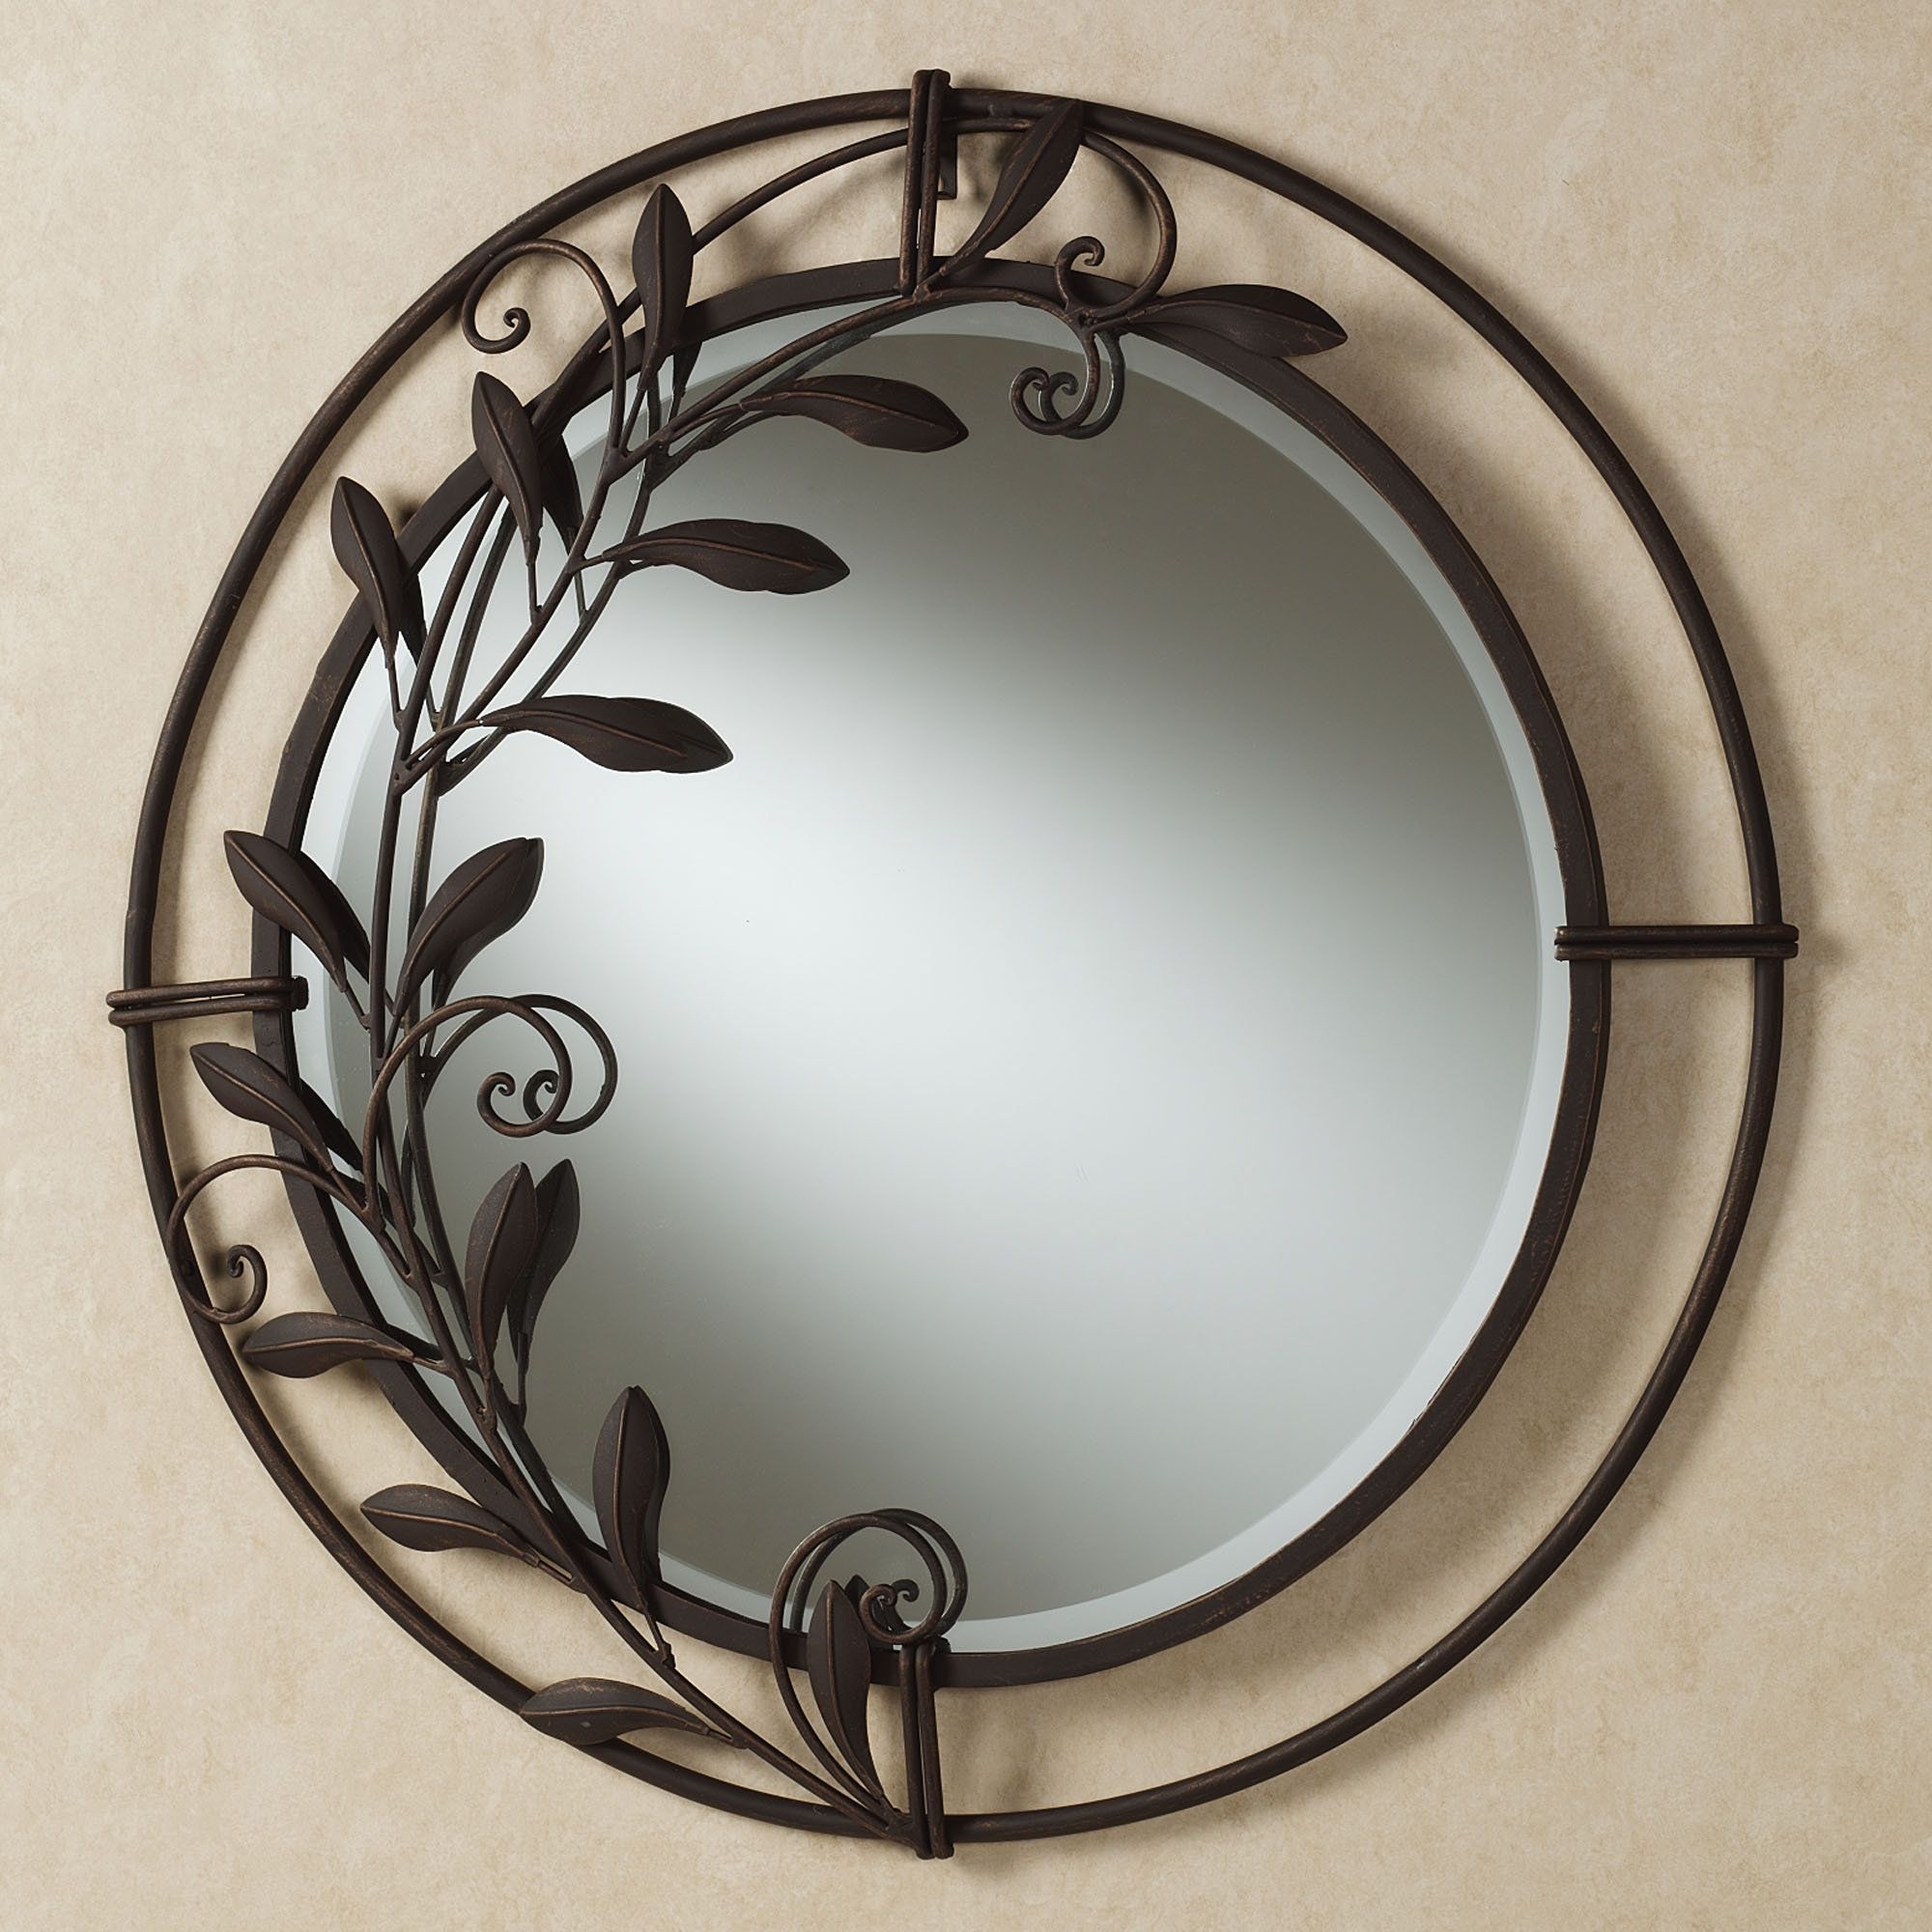 Galeazzo Antique Bronze Round Metal Wall Mirror • Bathroom Mirrors And In Antique Brass Wall Mirrors (View 3 of 15)